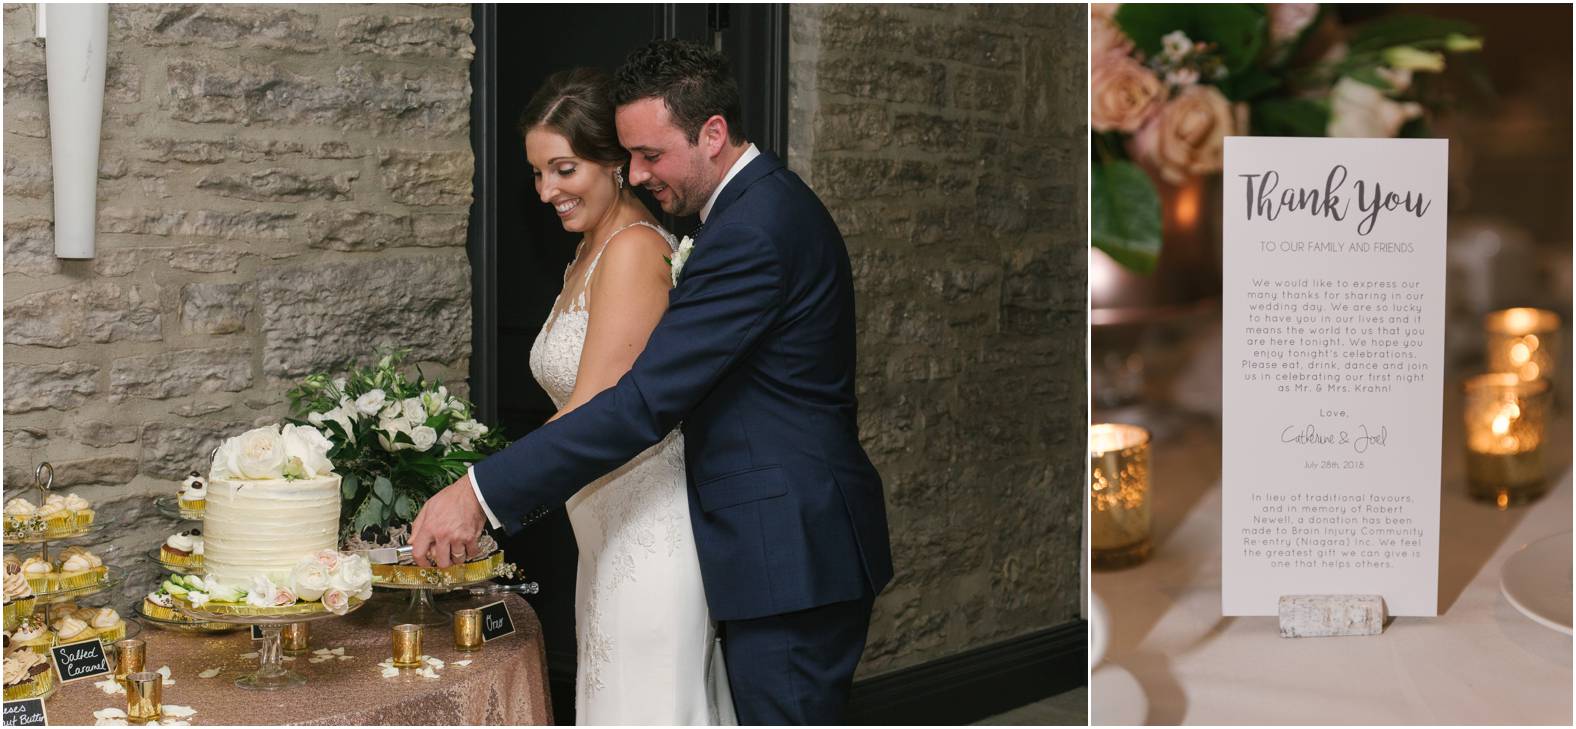 Bride and groom cut their cake at their Stone Mill Wedding